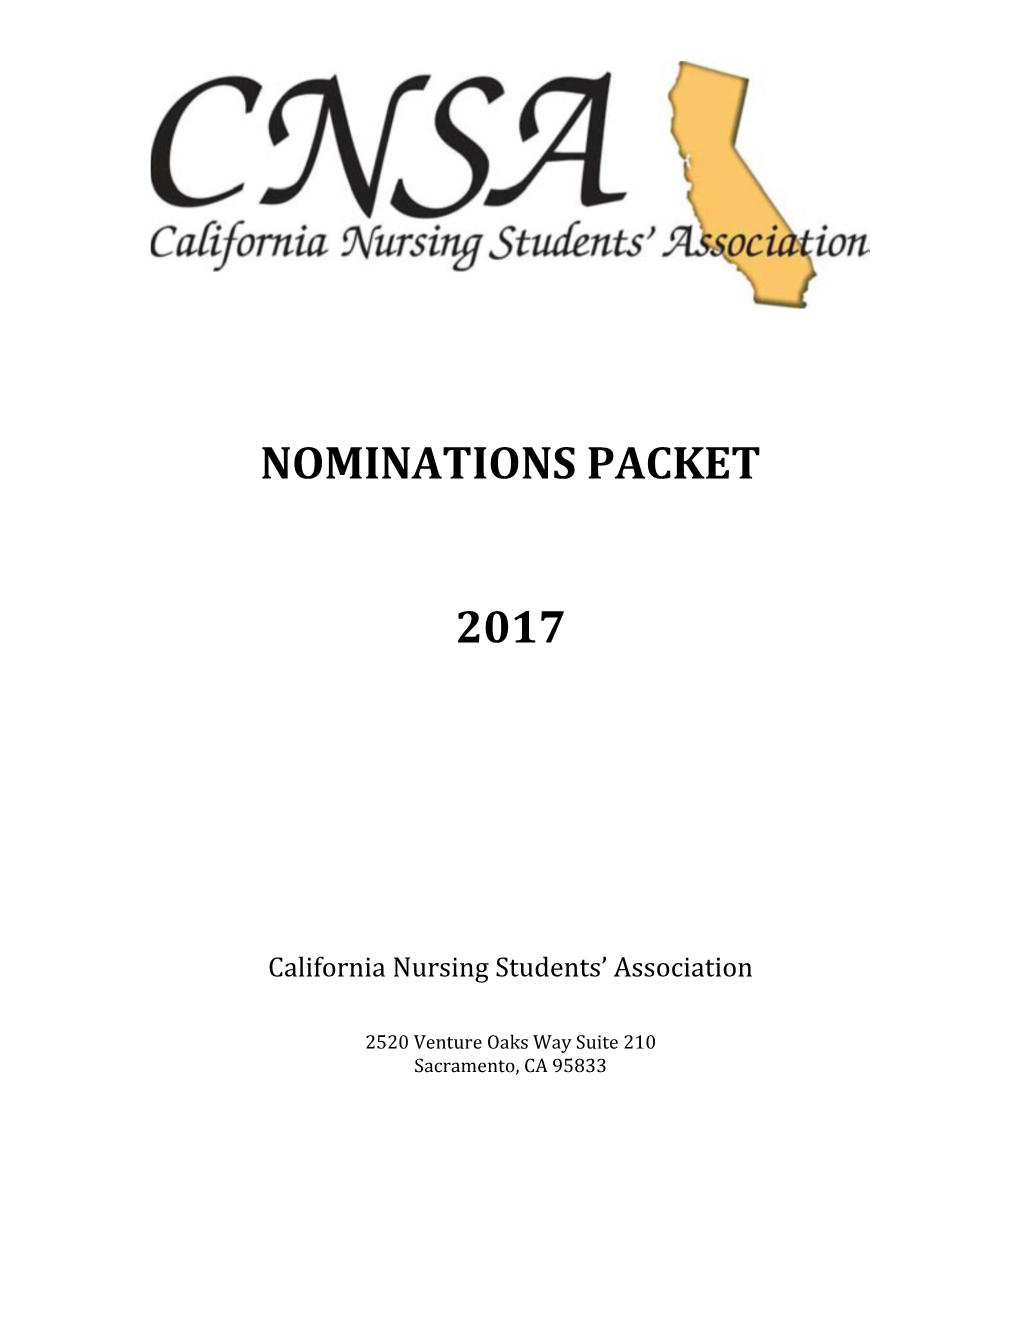 Nominations Packet